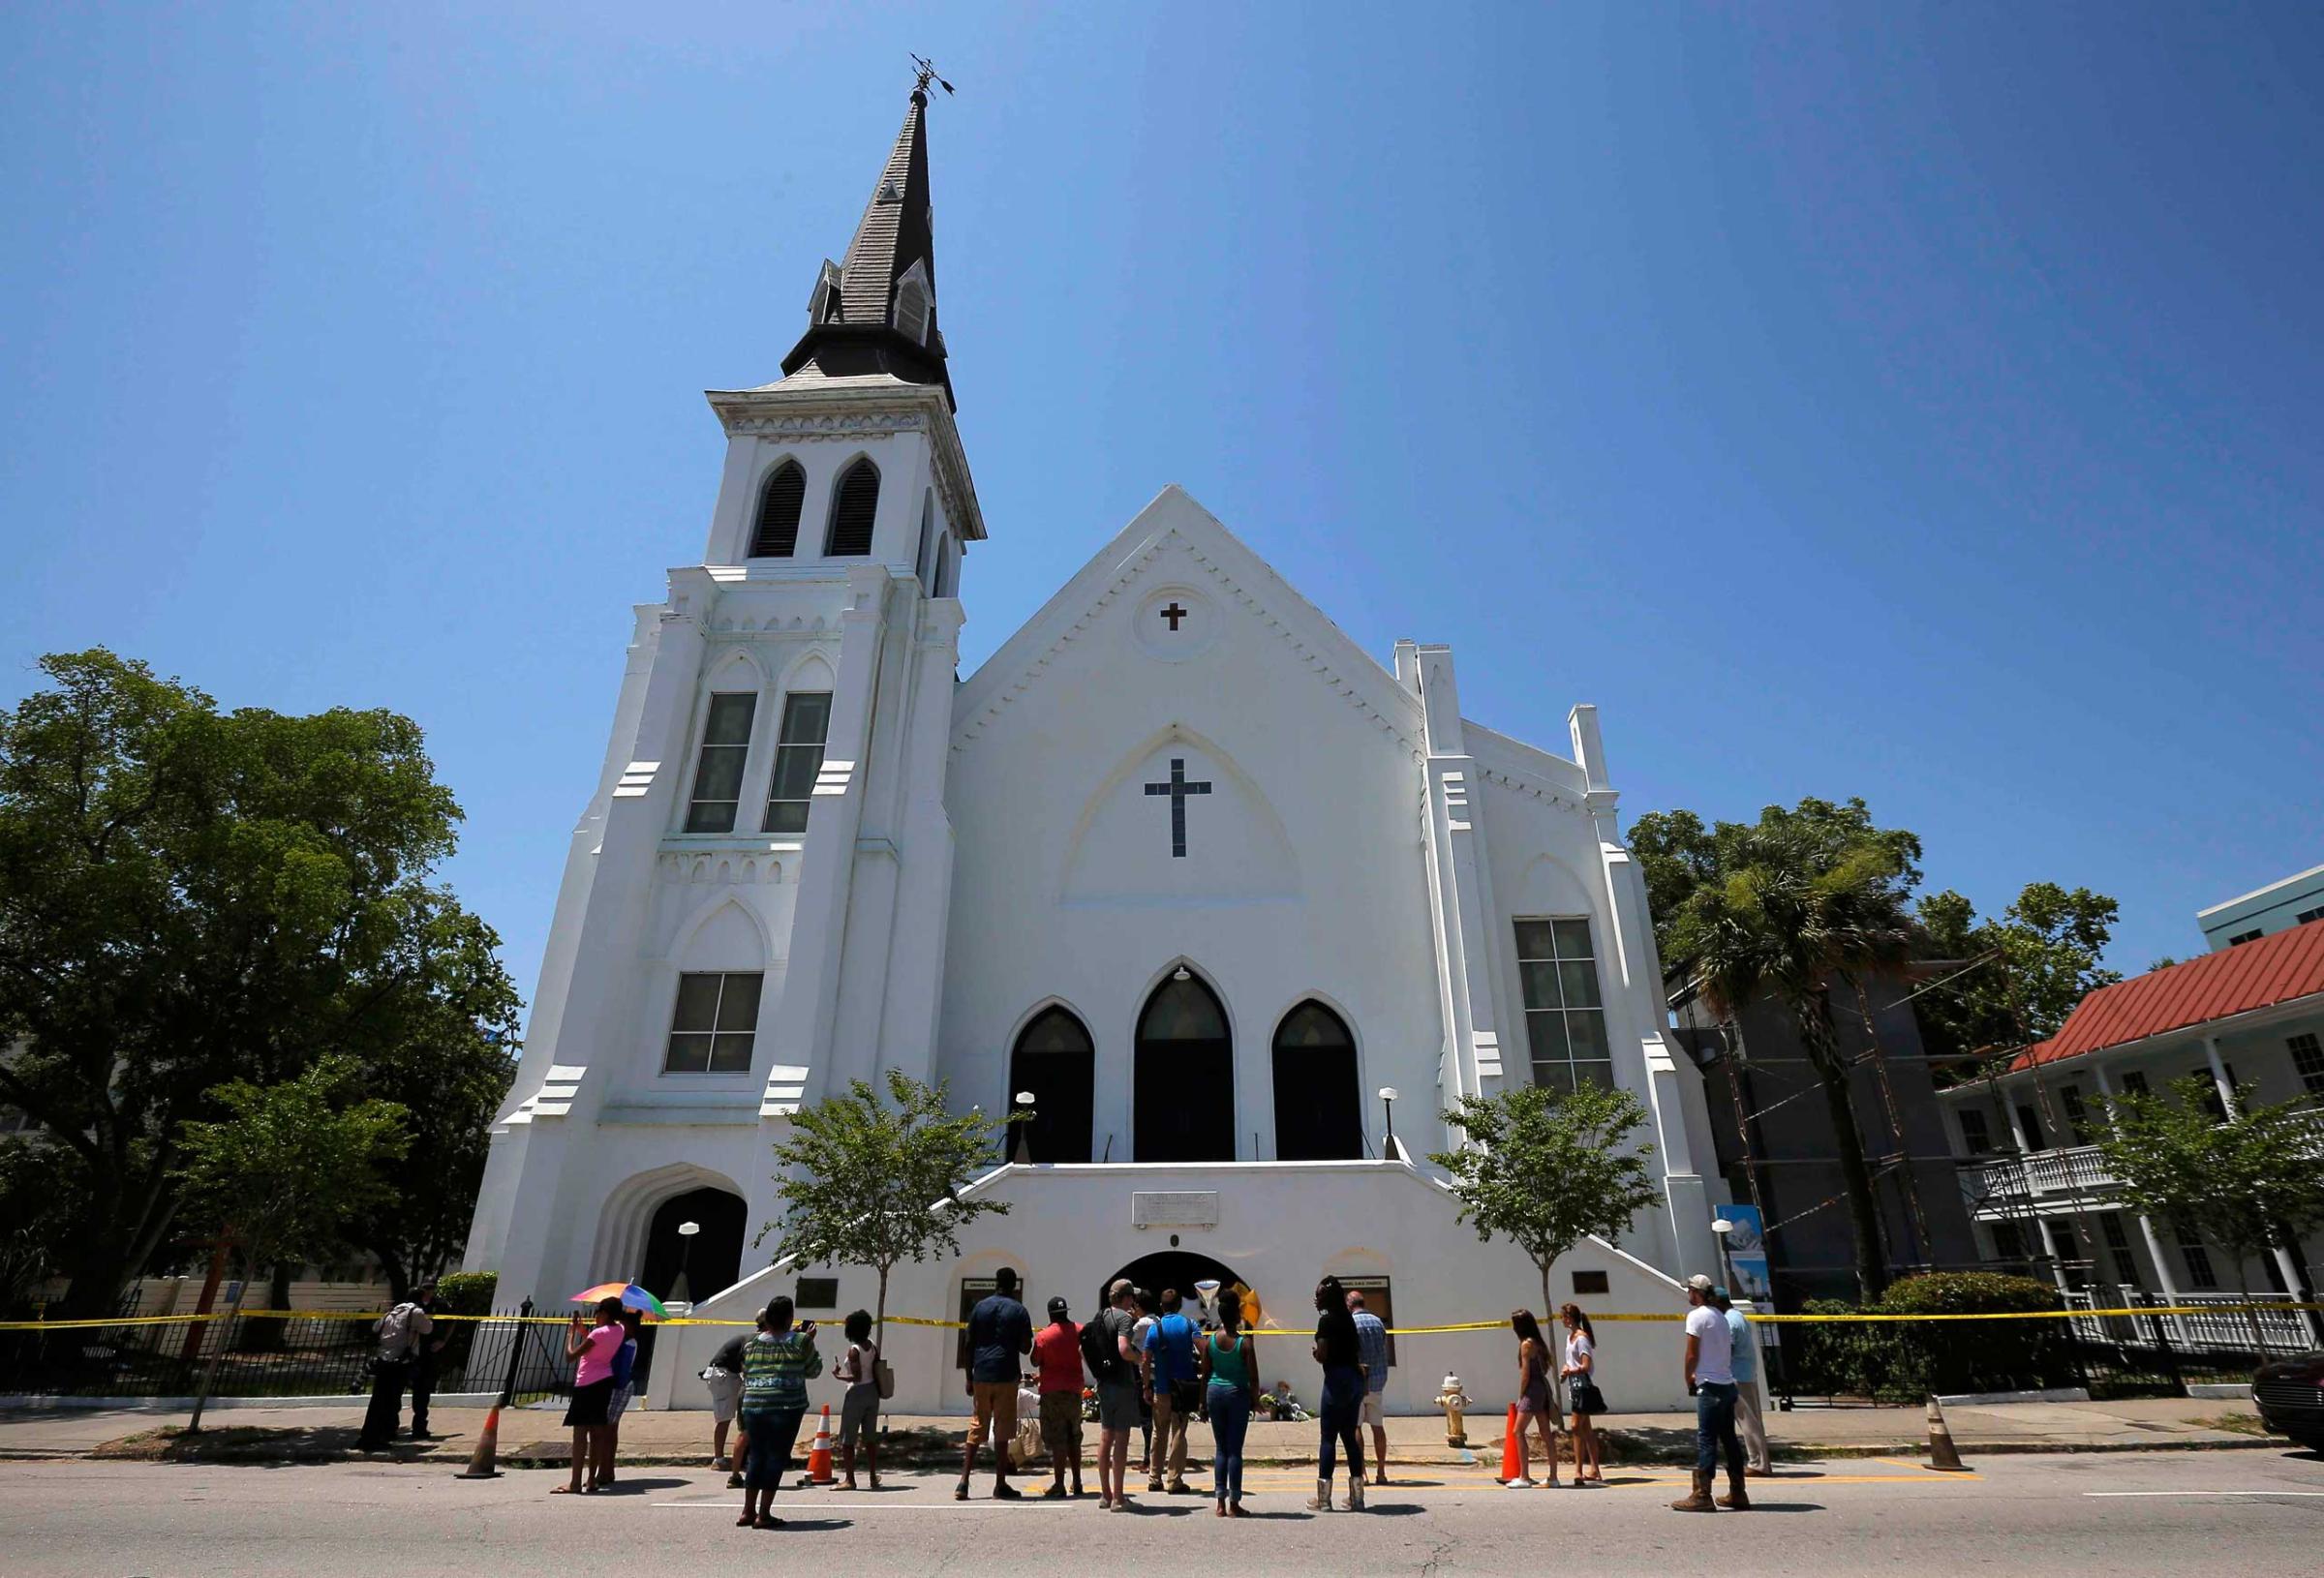 People gather outside Emanuel African Methodist Episcopal Church after the street was re-opened a day after a mass shooting left nine dead during a bible study at the church in Charleston